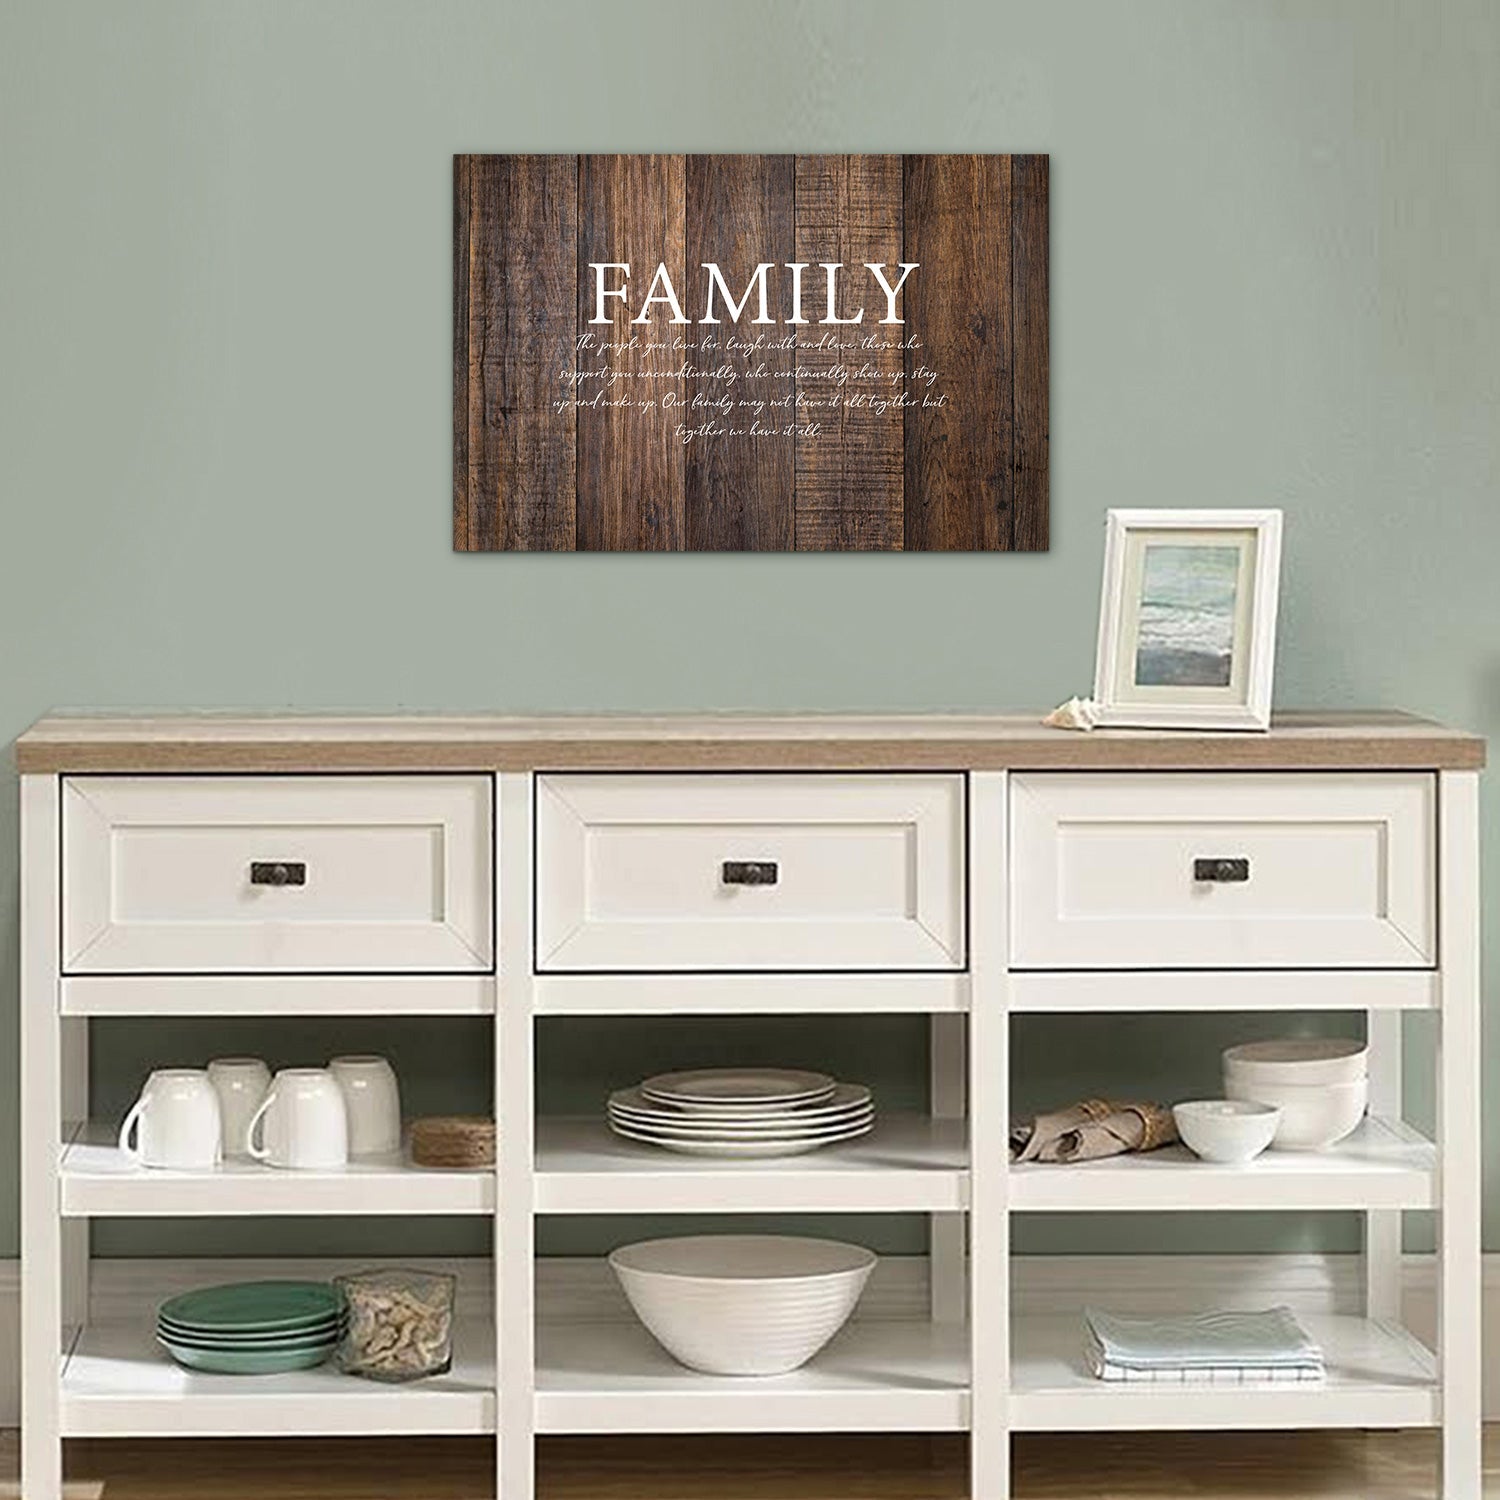 Family Home - Every Love Story is Beautiful Inspirational Canvas Wall Art Framed Modern Wall Decor Decorative Accents For Walls Ready to Hang for Home Living Room Bedroom Entryway Kitchen Office 24”x16” - LifeSong Milestones